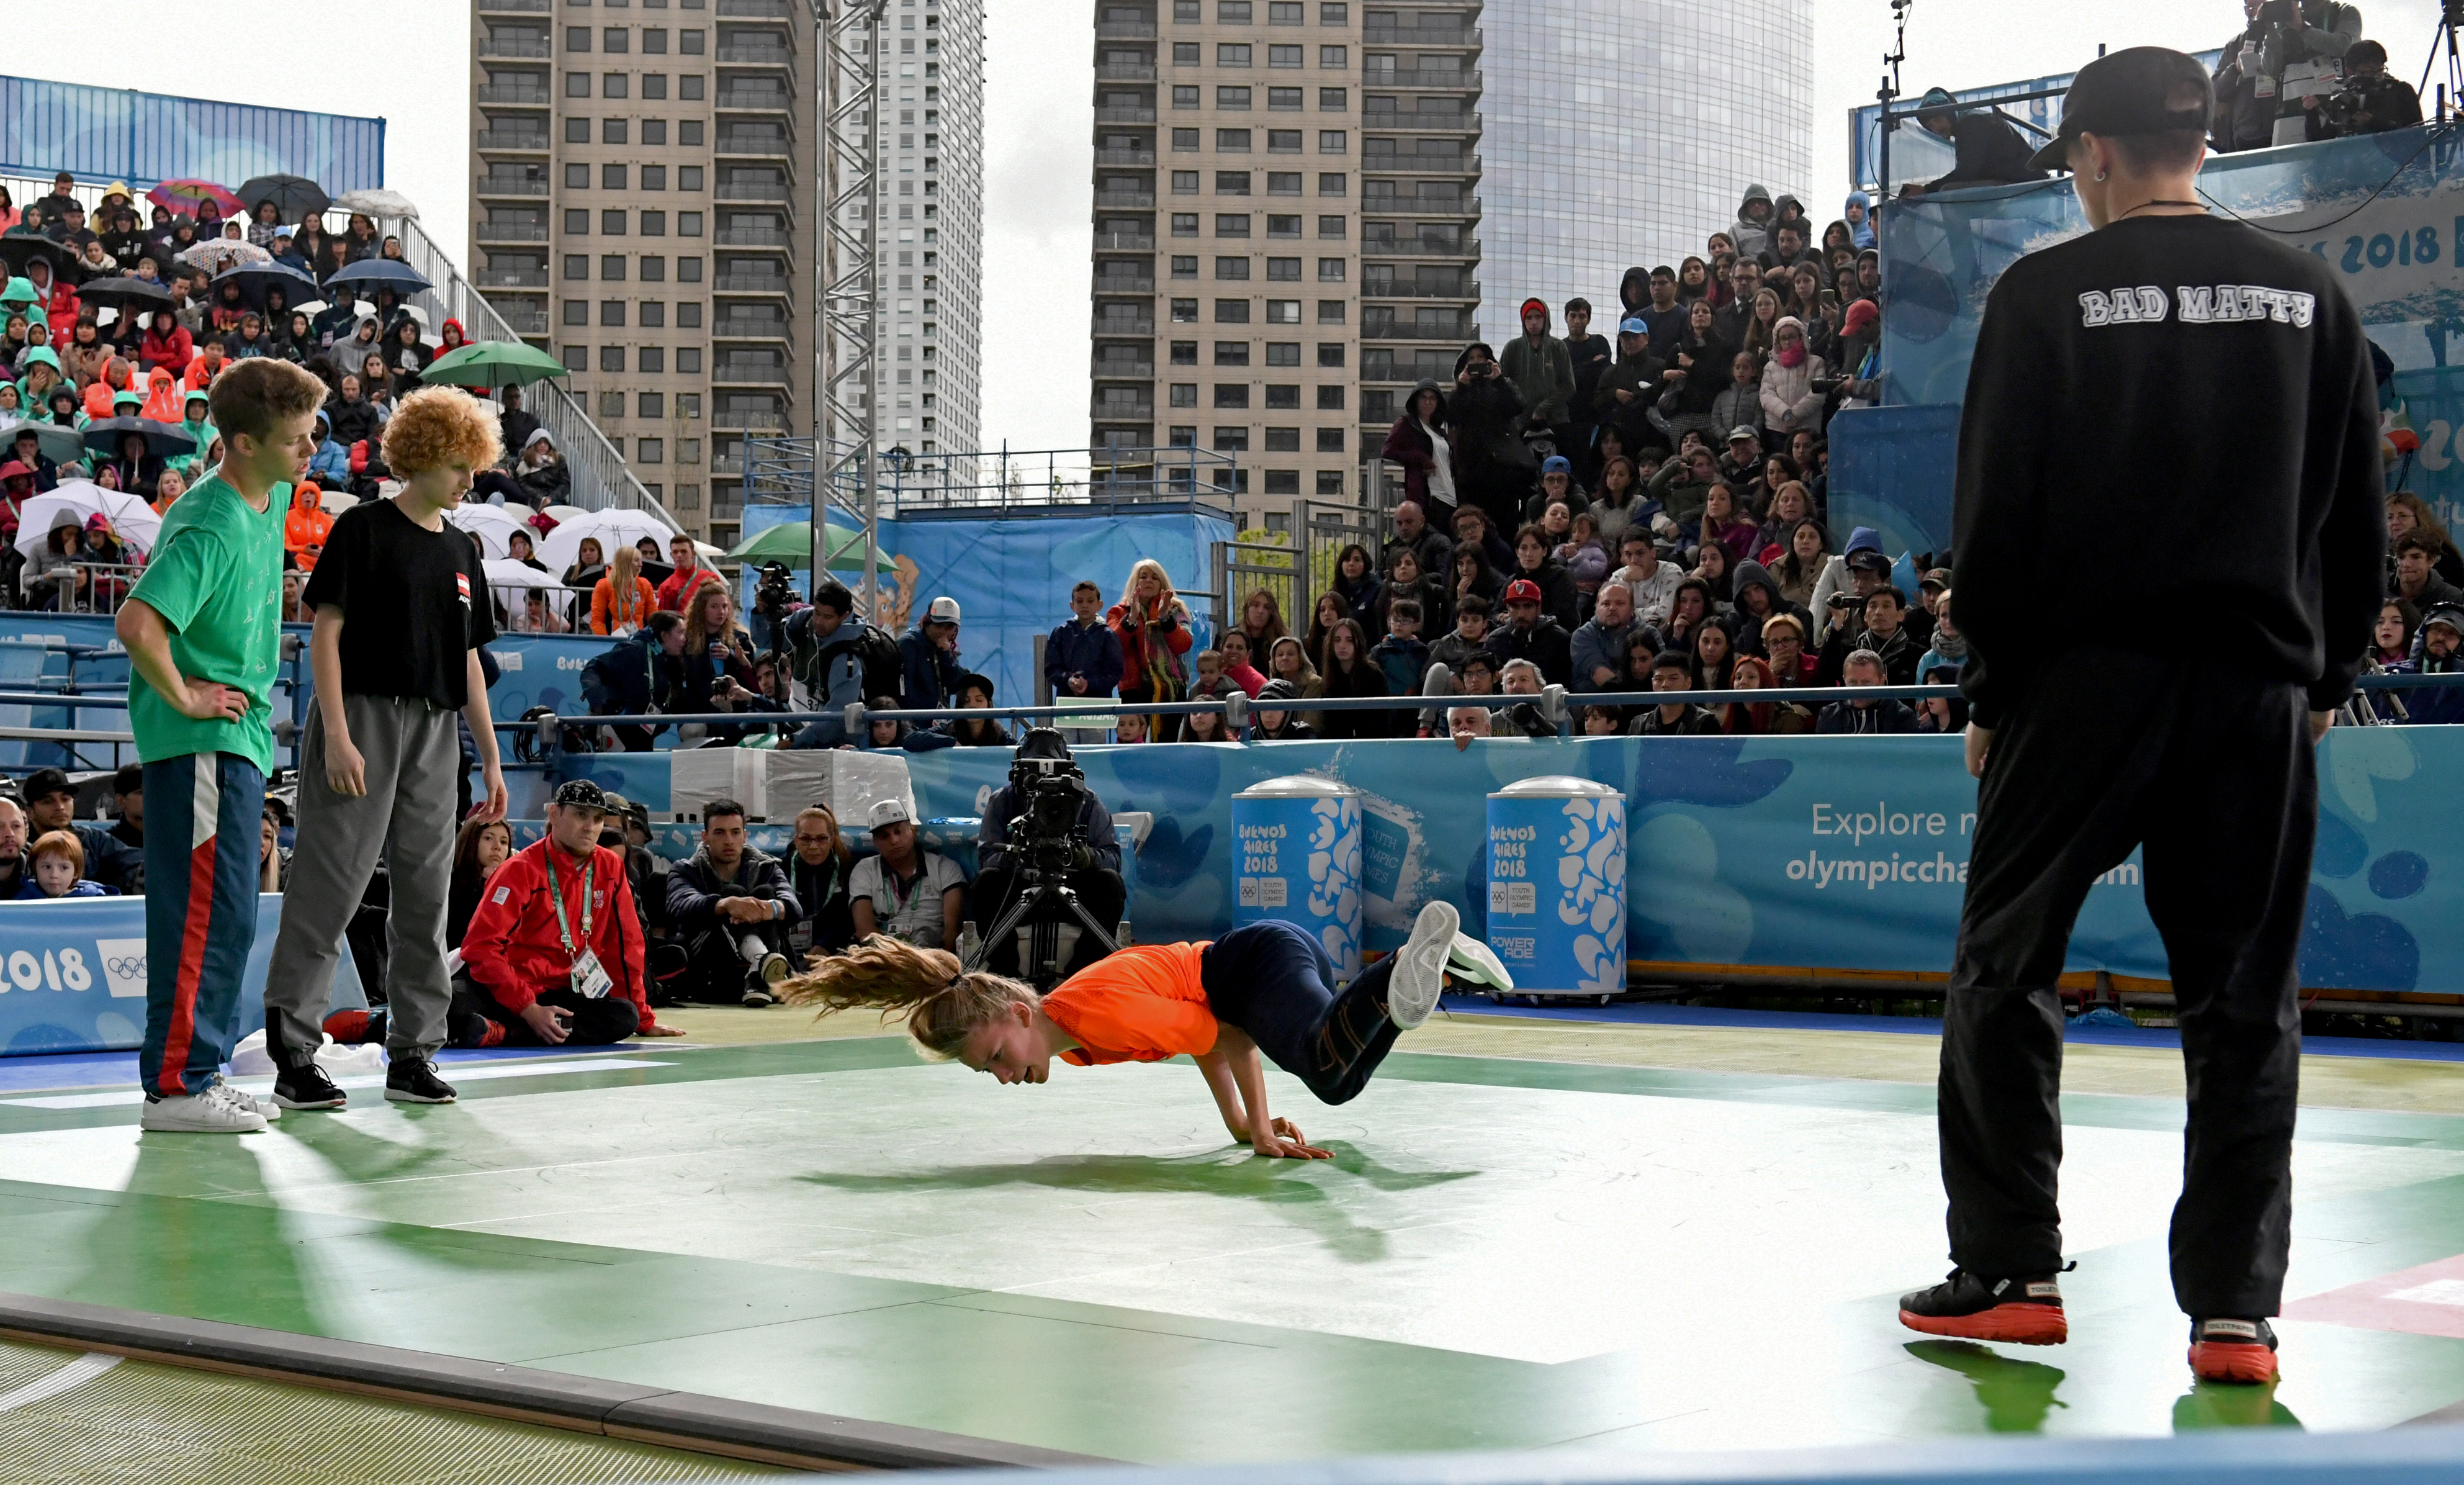 11 October 2018, Argentina, Buenos Aires: Breakdance semi-final at the Youth Olympic Games. Breakdance, the artistic dance style from the hip-hop scene, has arrived to the Olympics. Photo: Fabian Ramella/dpa (Photo by Fabian Ramella/picture alliance via Getty Images)